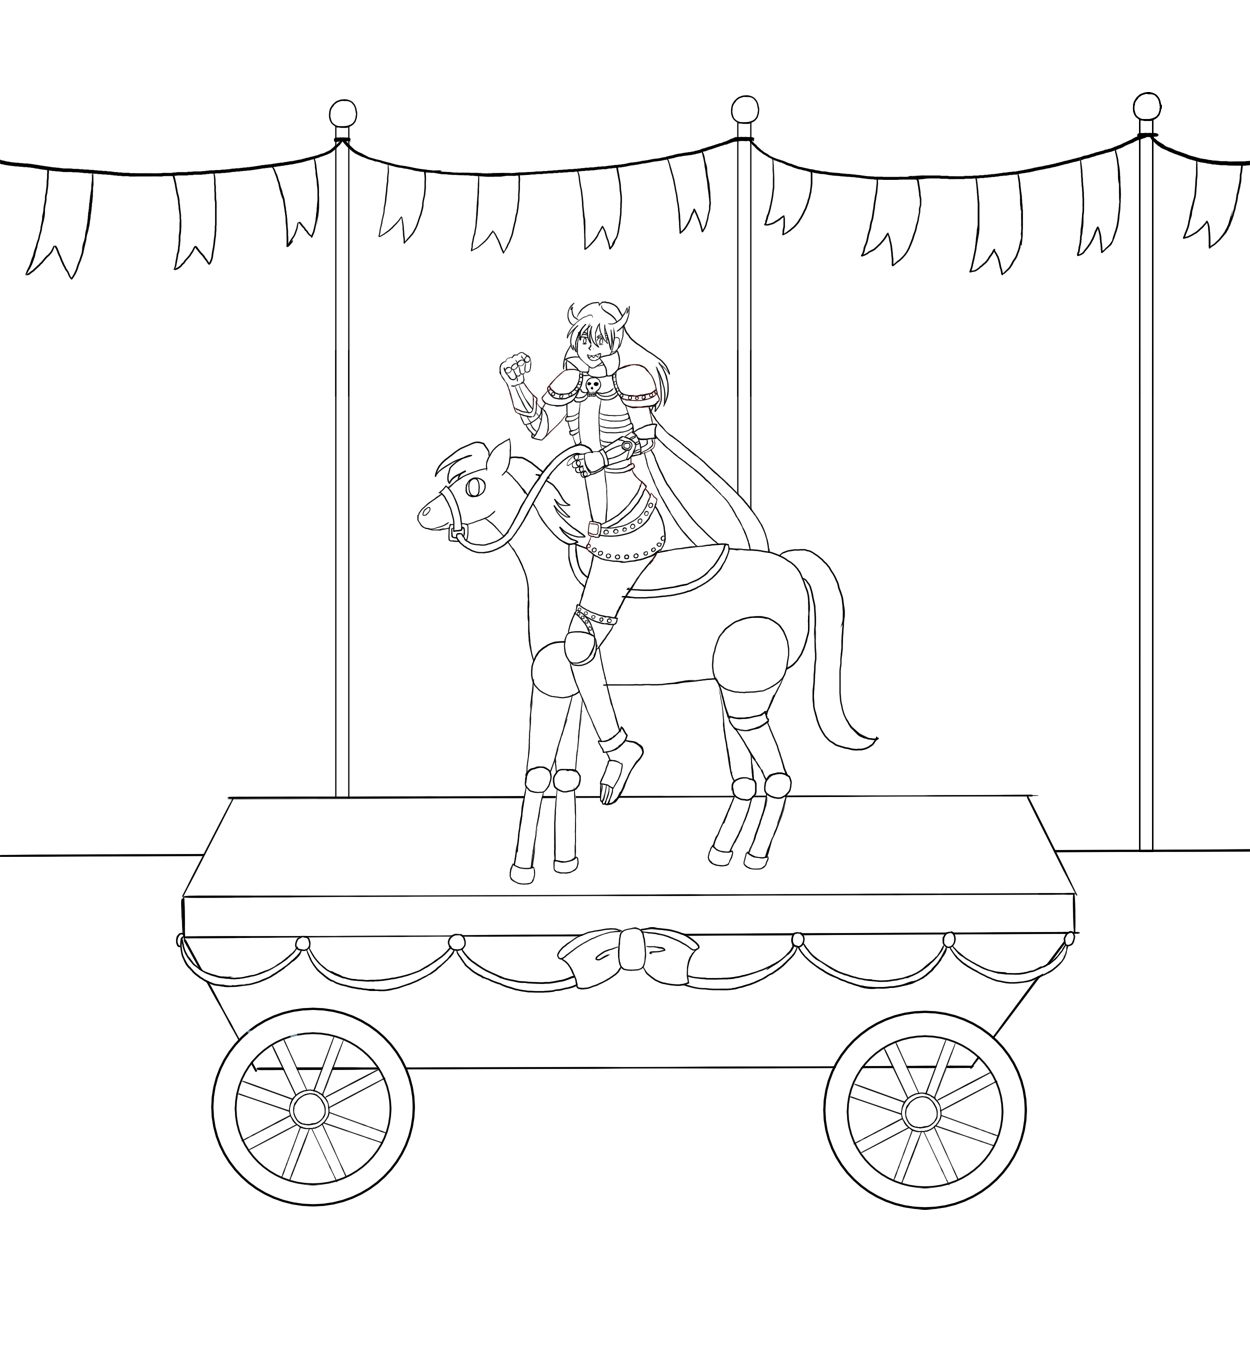 Image description: A line art drawing showing Santana from Magical Renegades dressed in knight armor that has a skeleton motif to it, and he's riding a large toy horse that's on a cart in a celebratory parade. In the background are banners waving in the wind.